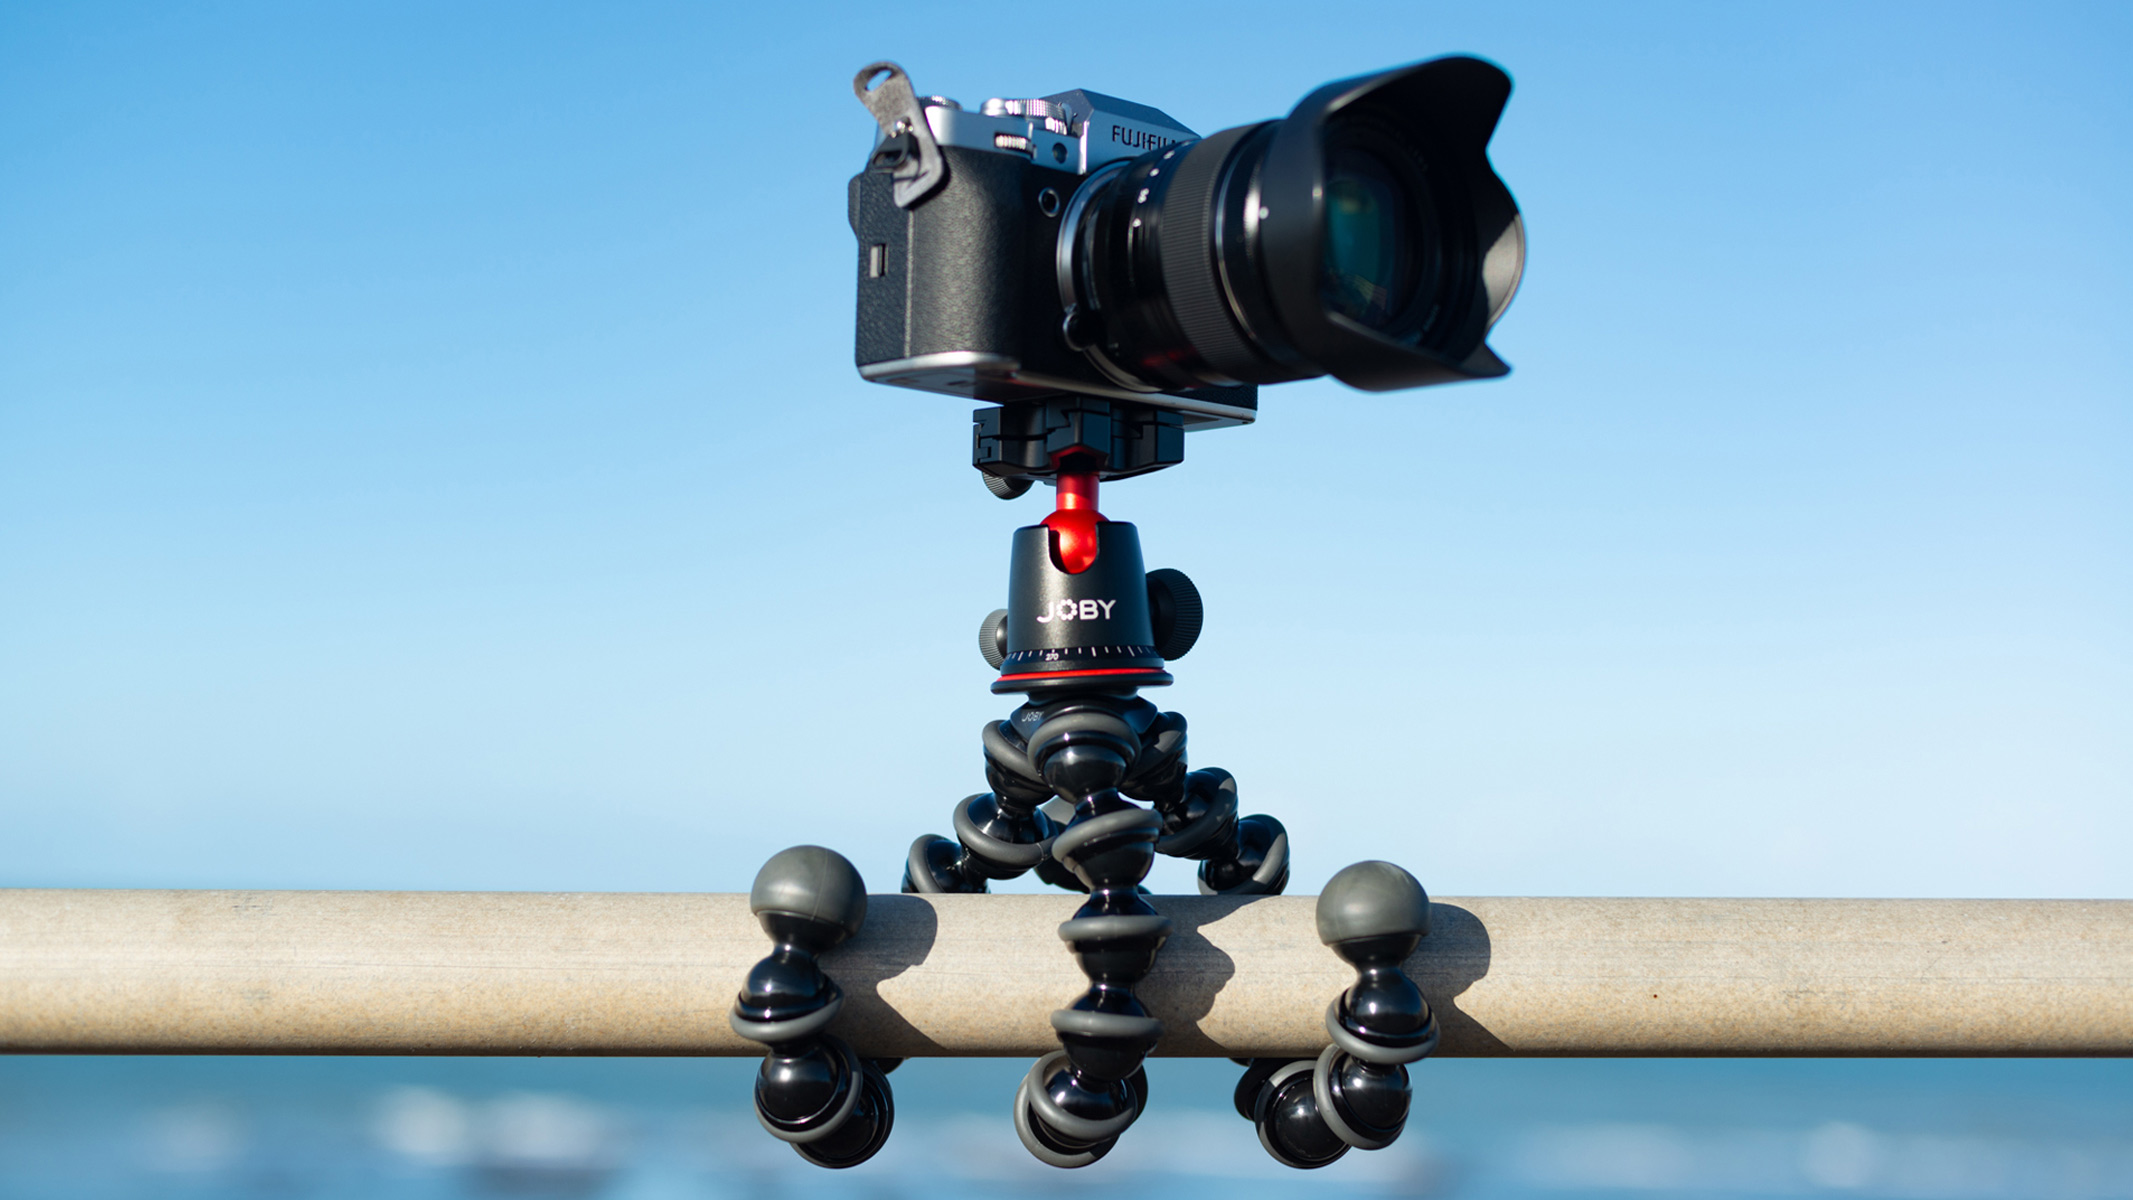 Joby gorillapod 5k attached to a horizontal pole with a blue sky behind